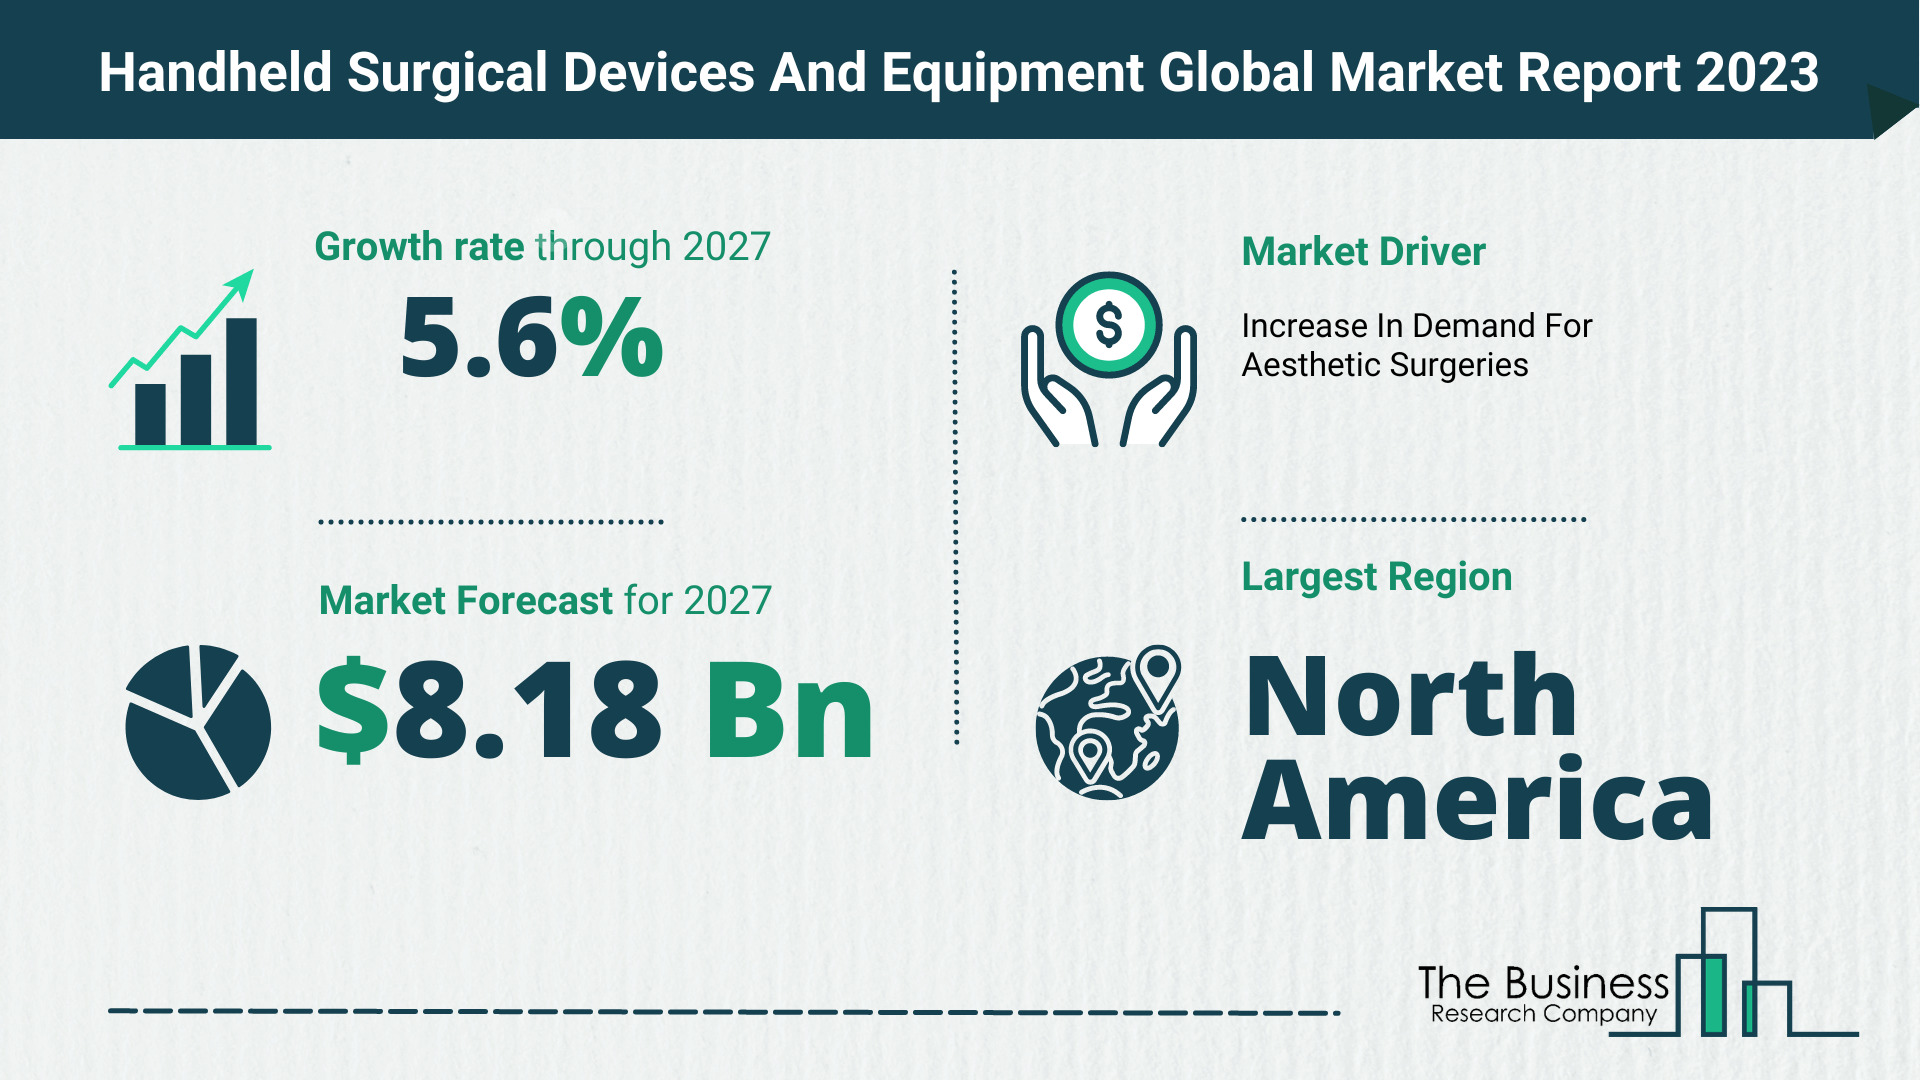 Global Handheld Surgical Devices And Equipment Market Opportunities And Strategies 2023